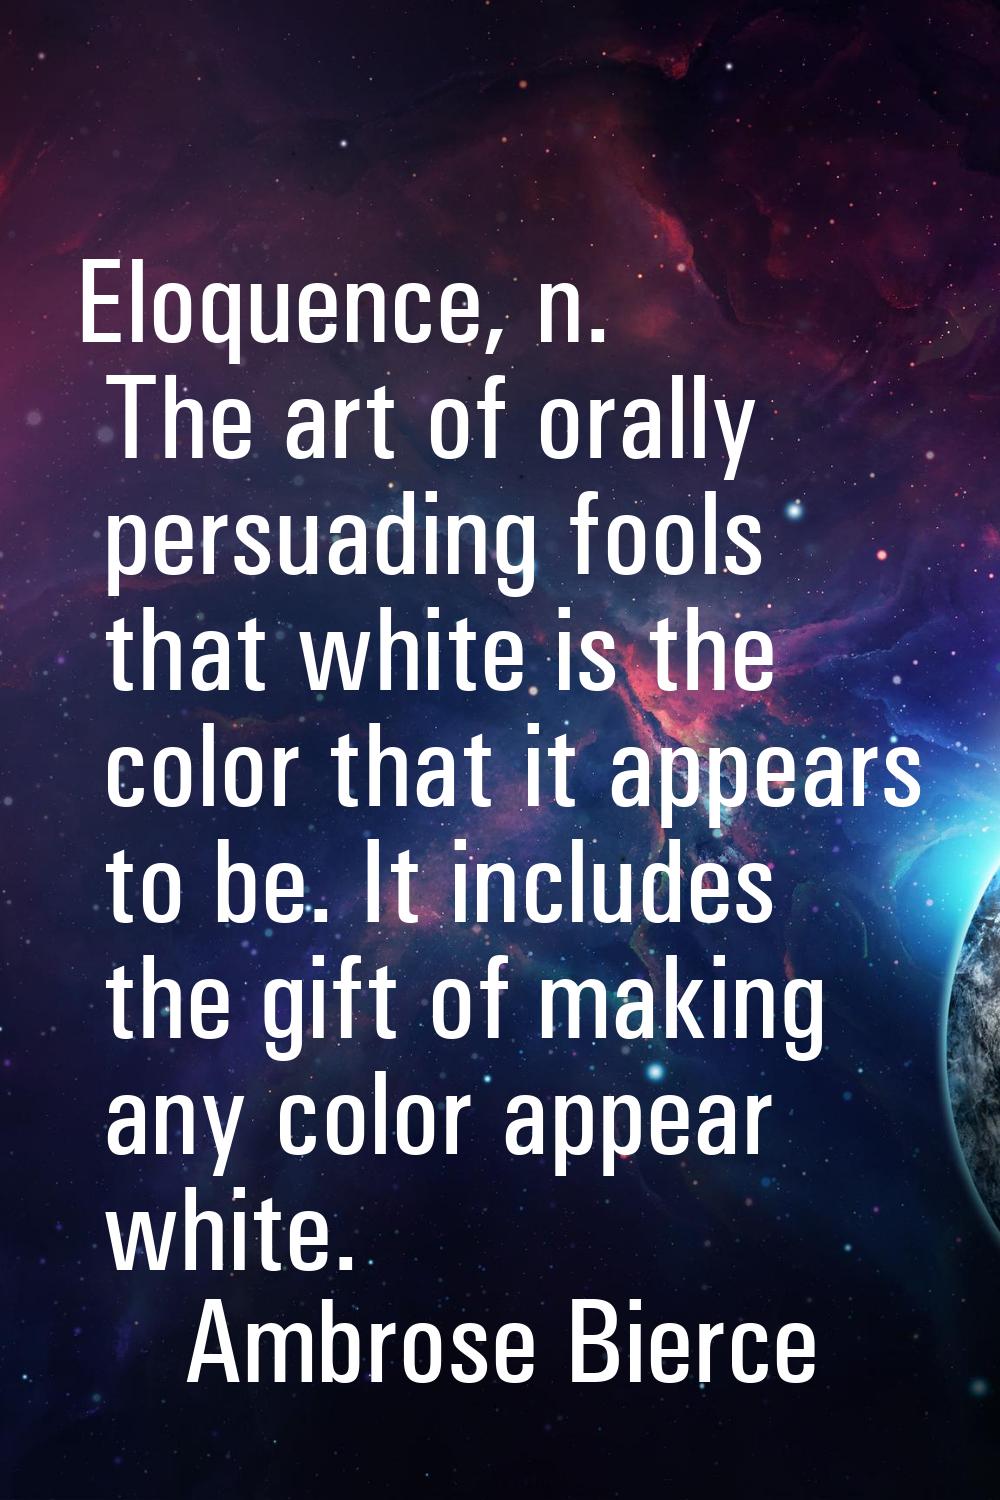 Eloquence, n. The art of orally persuading fools that white is the color that it appears to be. It 